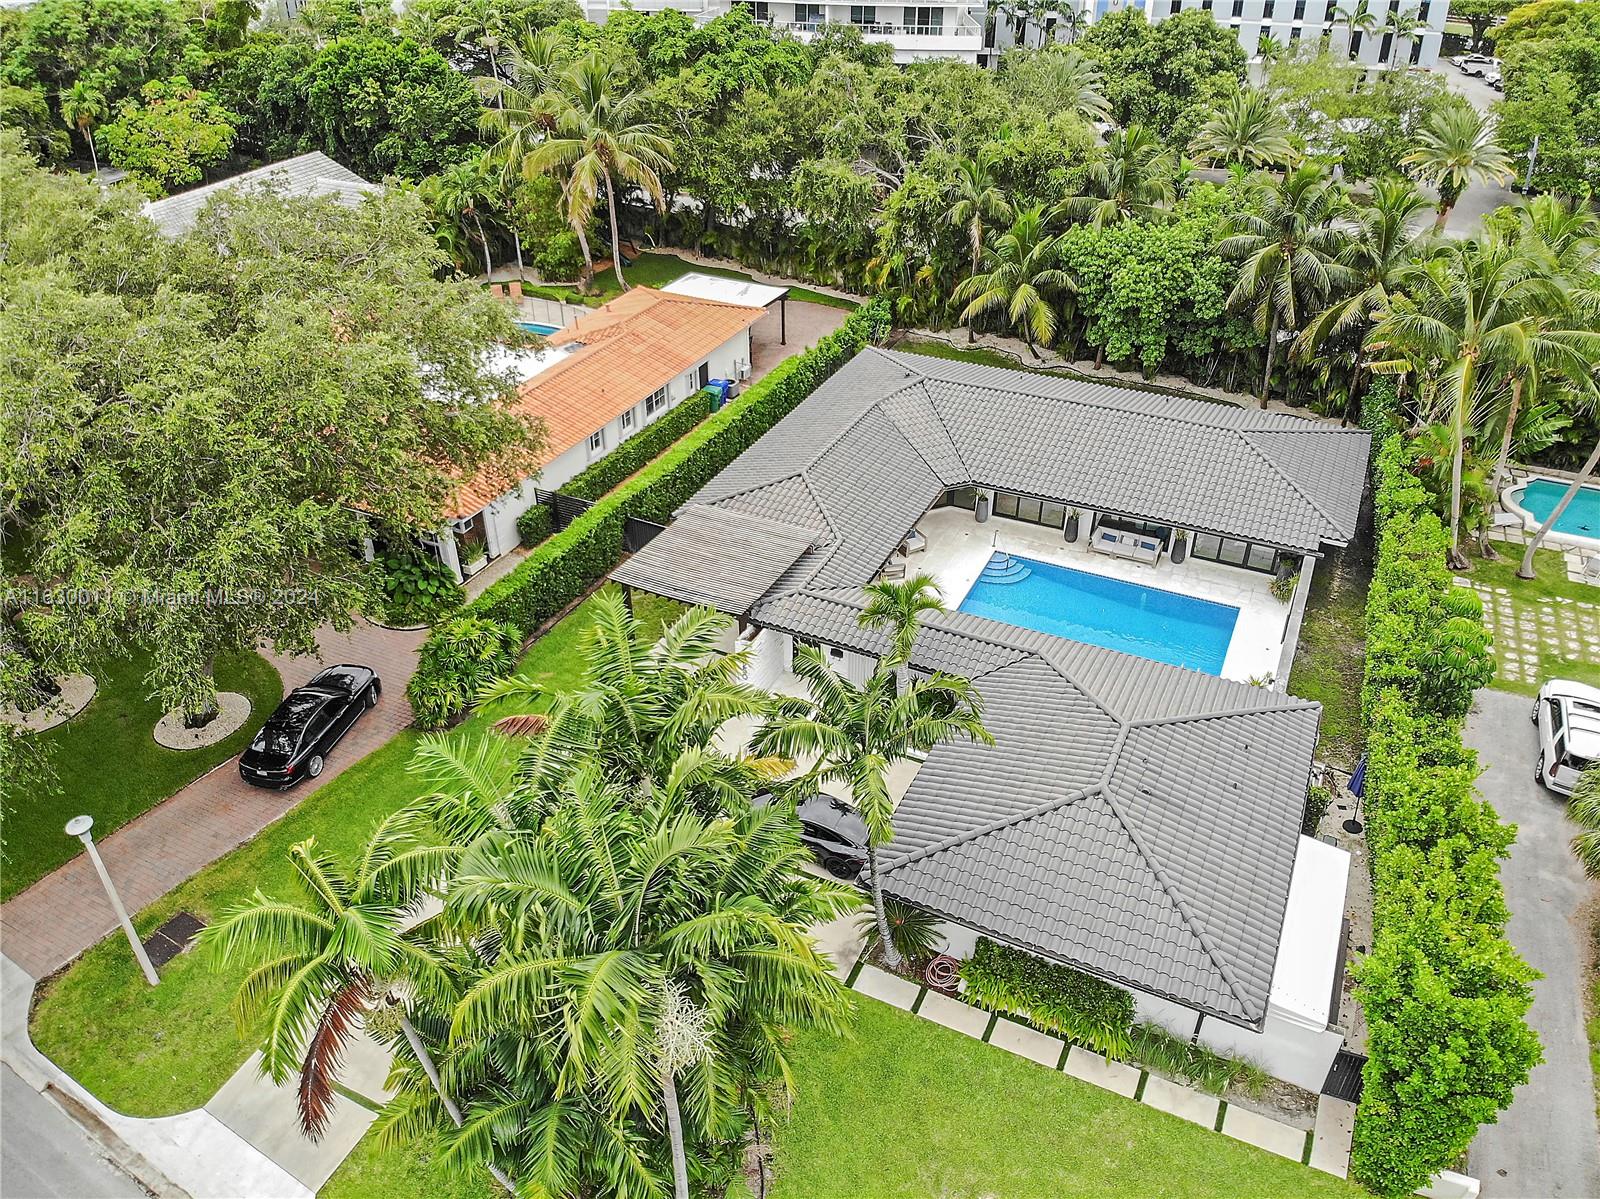 Located in one of the most coveted guard-gated communities in Miami, this Bay Point home was fully remodeled in 2019. Its U-shaped design allows for tons of natural light as all rooms open to a center courtyard featuring a beautiful mosaic pool and outdoor kitchen. Upon entry, you are greeted by a custom Italian kitchen and an open living/dining area with wide-plank wood floors that flow throughout the home and into its 4 bedrooms, 2 of which are ensuite. There are 3 additional full bathrooms, a laundry room and storage room/service quarters. The rear of the home has a deck and spacious yard surrounded by mature trees. Located within short distances to the Cushman School, the Miami Design District, Midtown Miami, Wynwood, Miami International Airport and Miami Beach. Tax record shows 2667SF